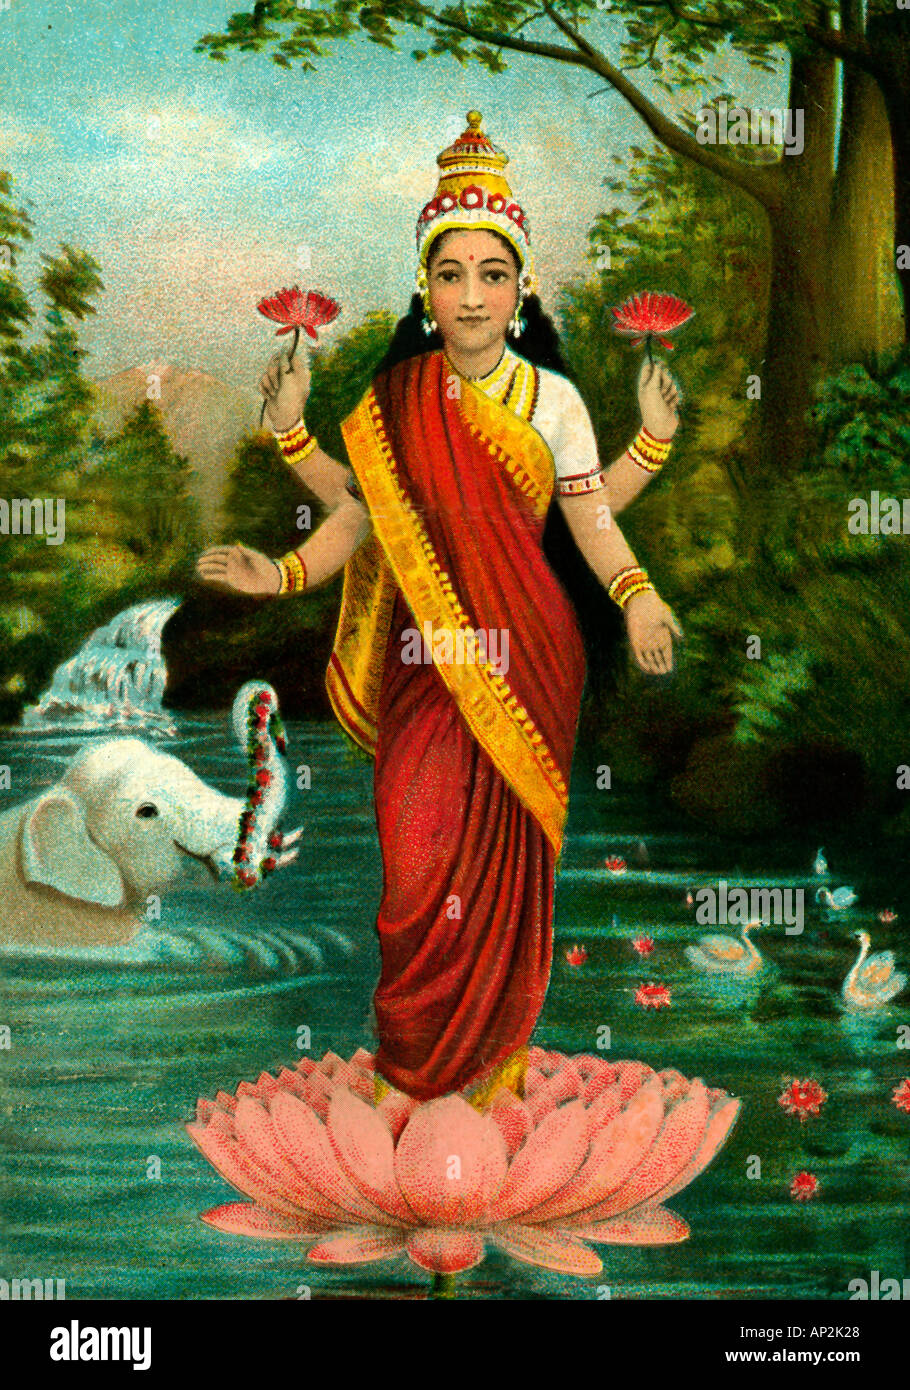 Painting of Laxmi indian goddess of wealth standing in